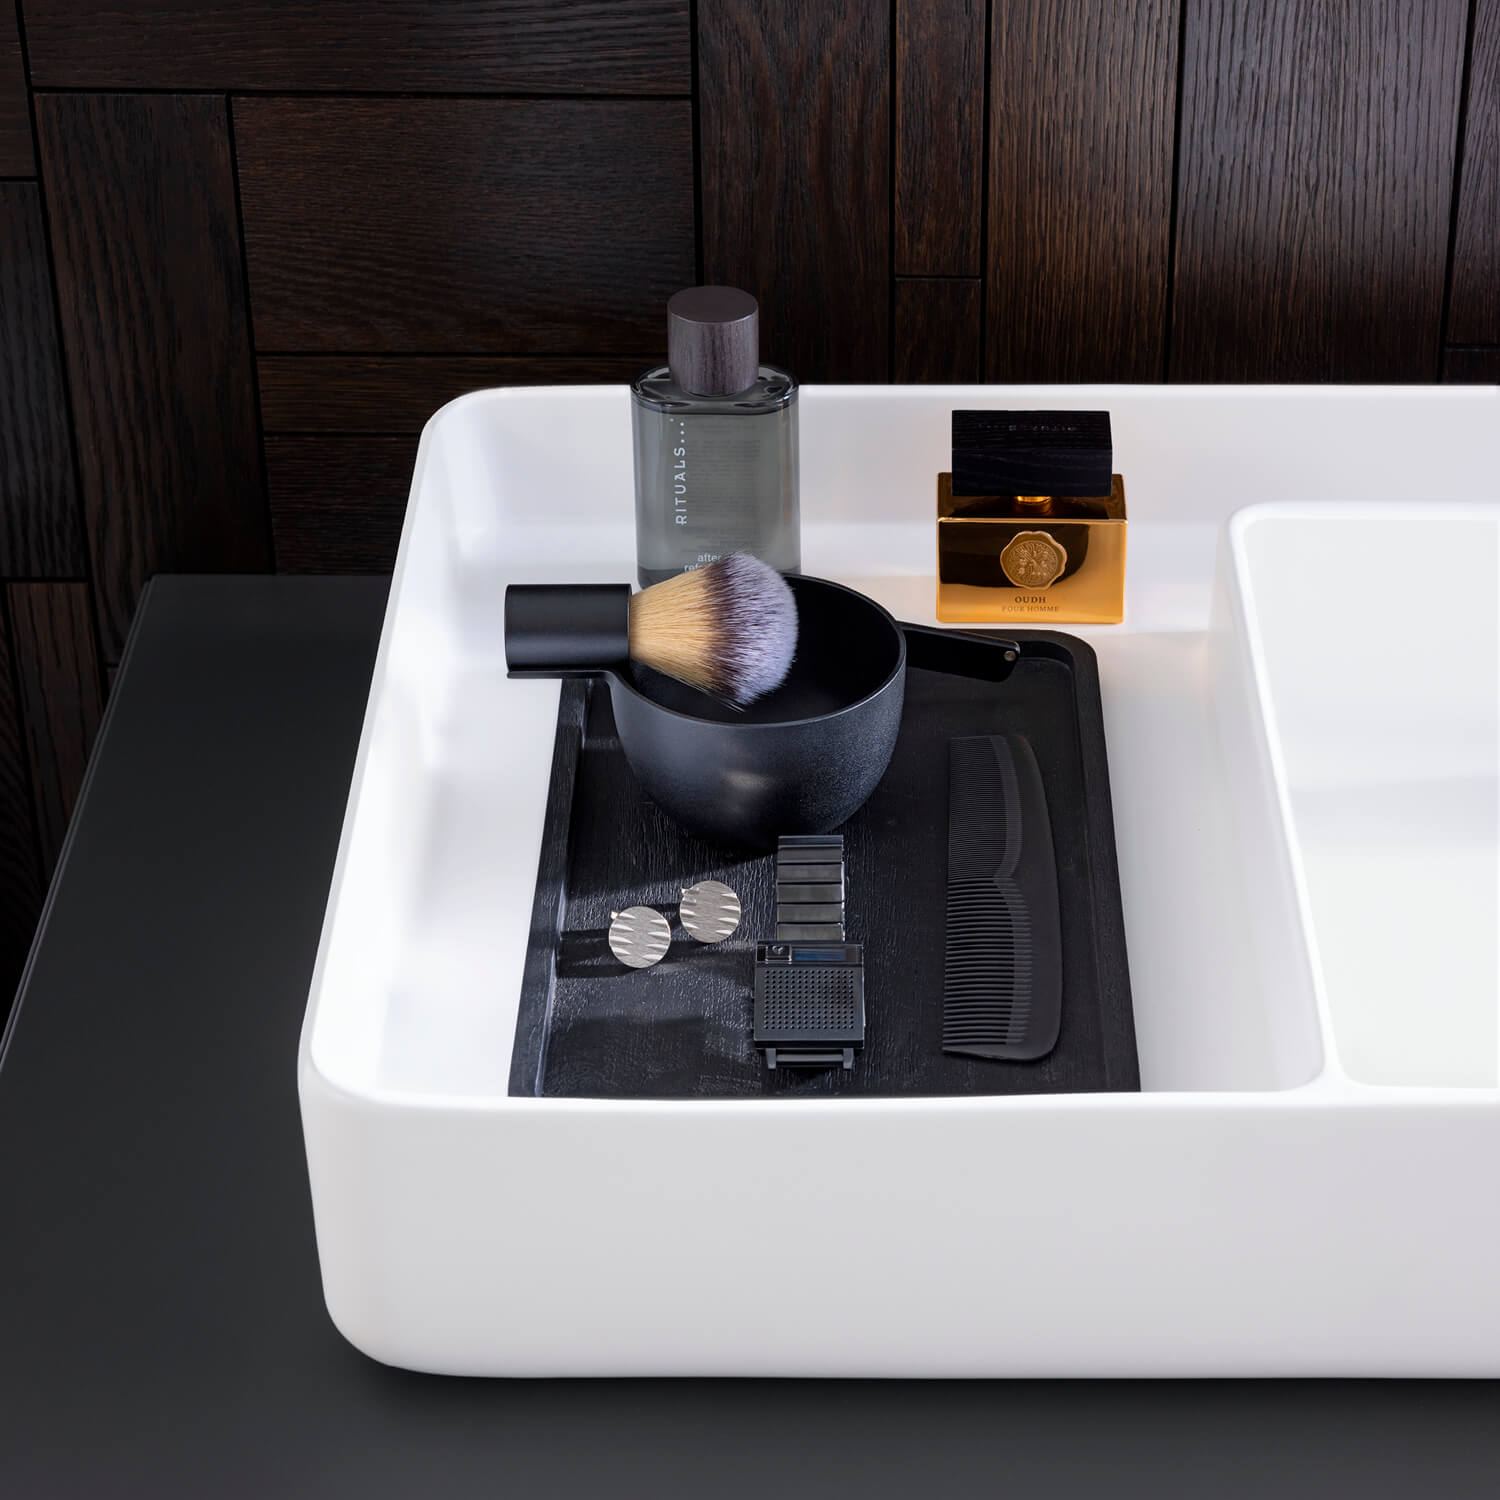 Bento Starck Box washbasin with plenty of space for care products
